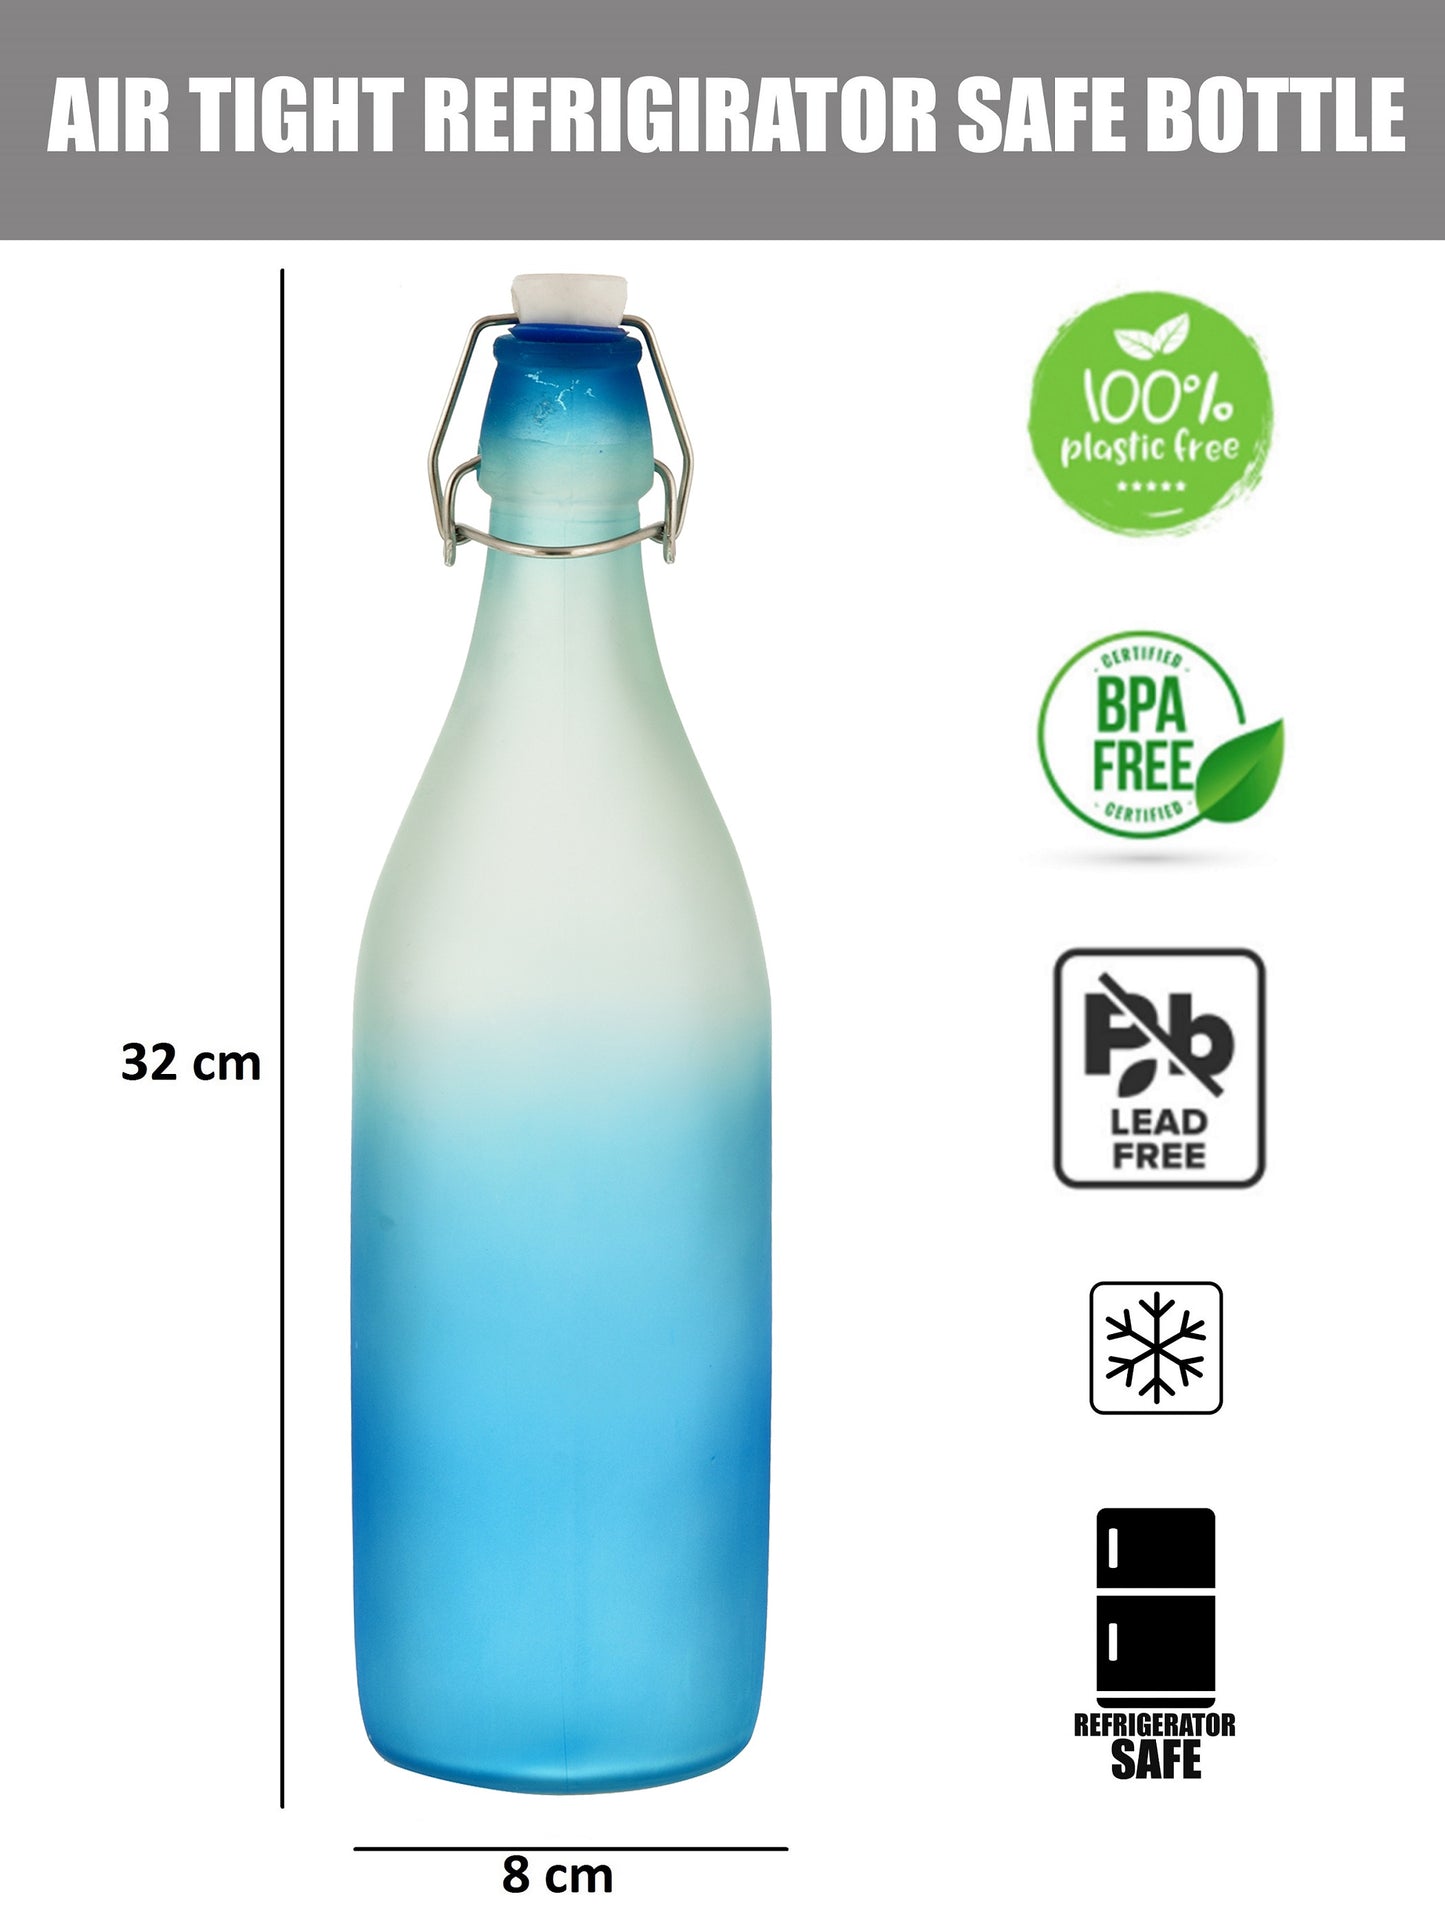 Machak Frosted Colorful Glass Water Bottles 1 litre, Mix Colors